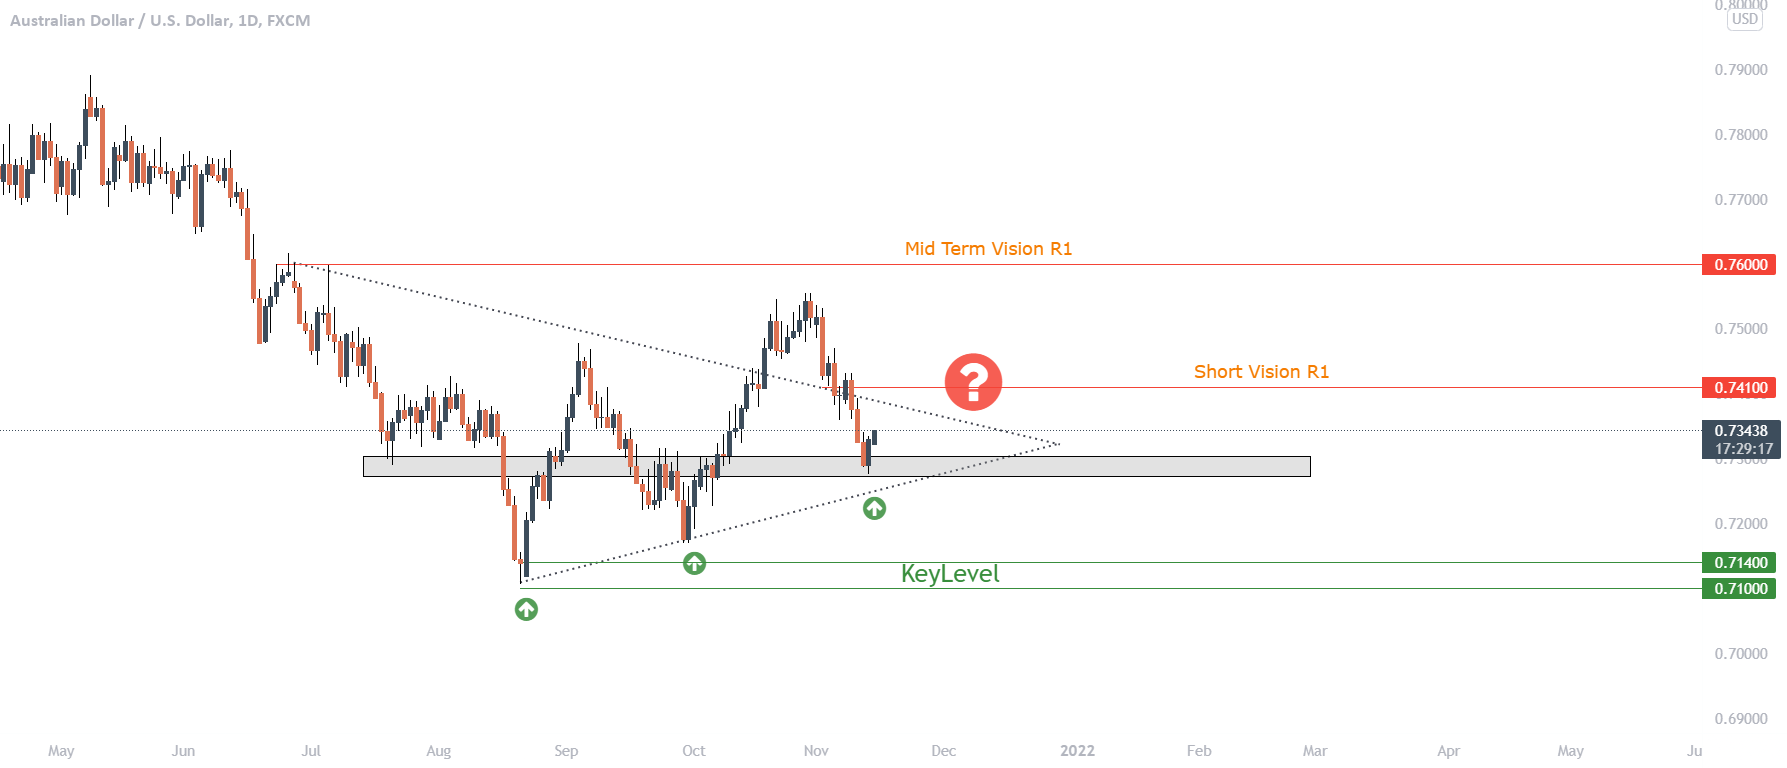 Bond Yield Fluctuations Are The Significant Cause Of AUD/USD For FX:AUDUSD By VipForexLive